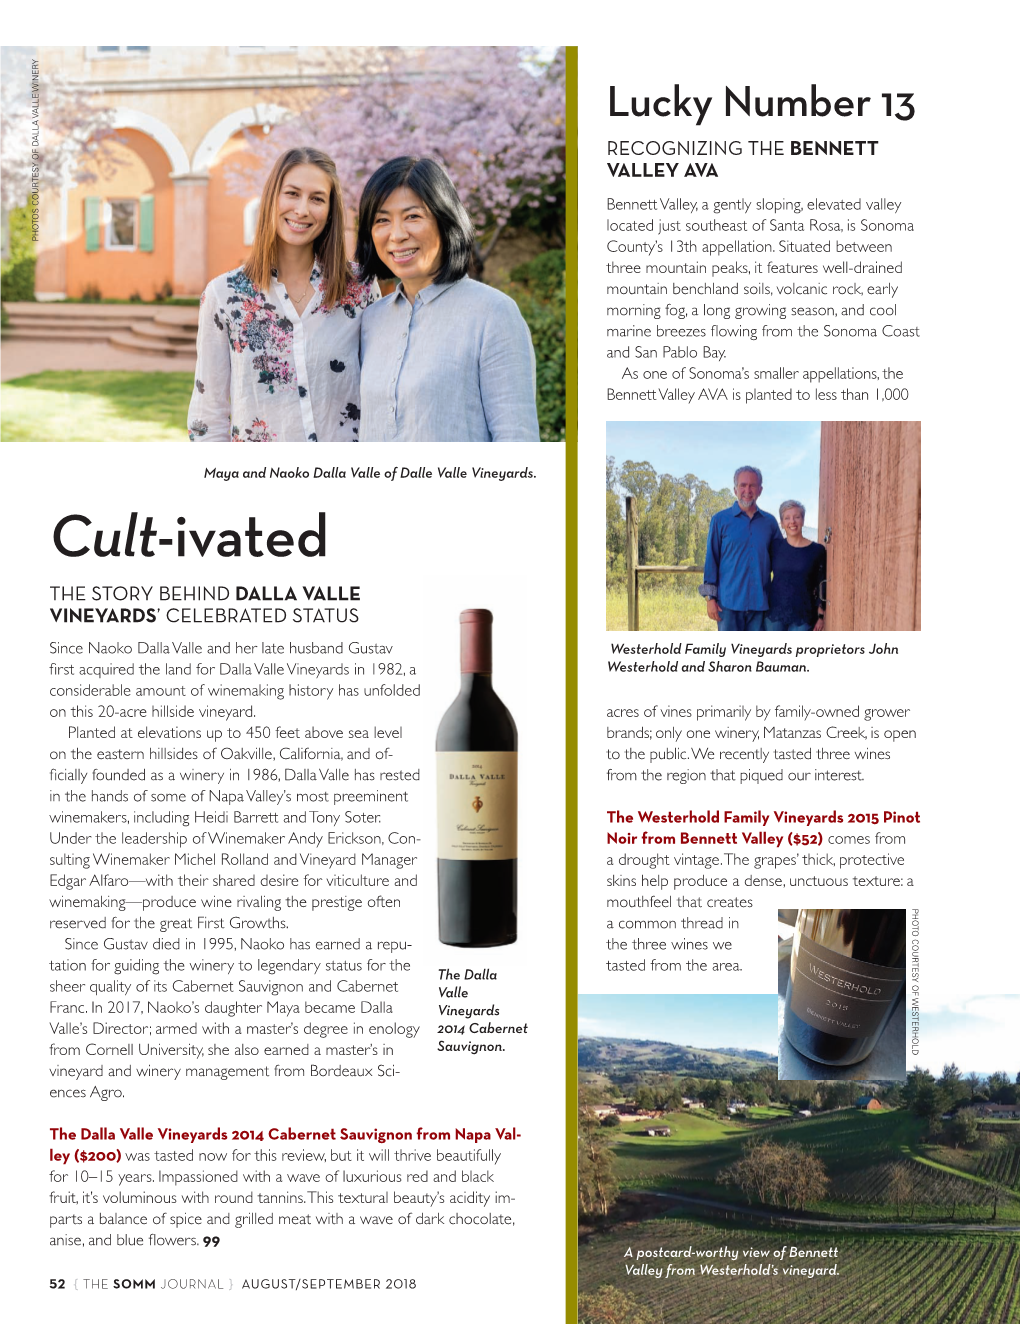 Cult-Ivated the STORY BEHIND DALLA VALLE VINEYARDS’ CELEBRATED STATUS